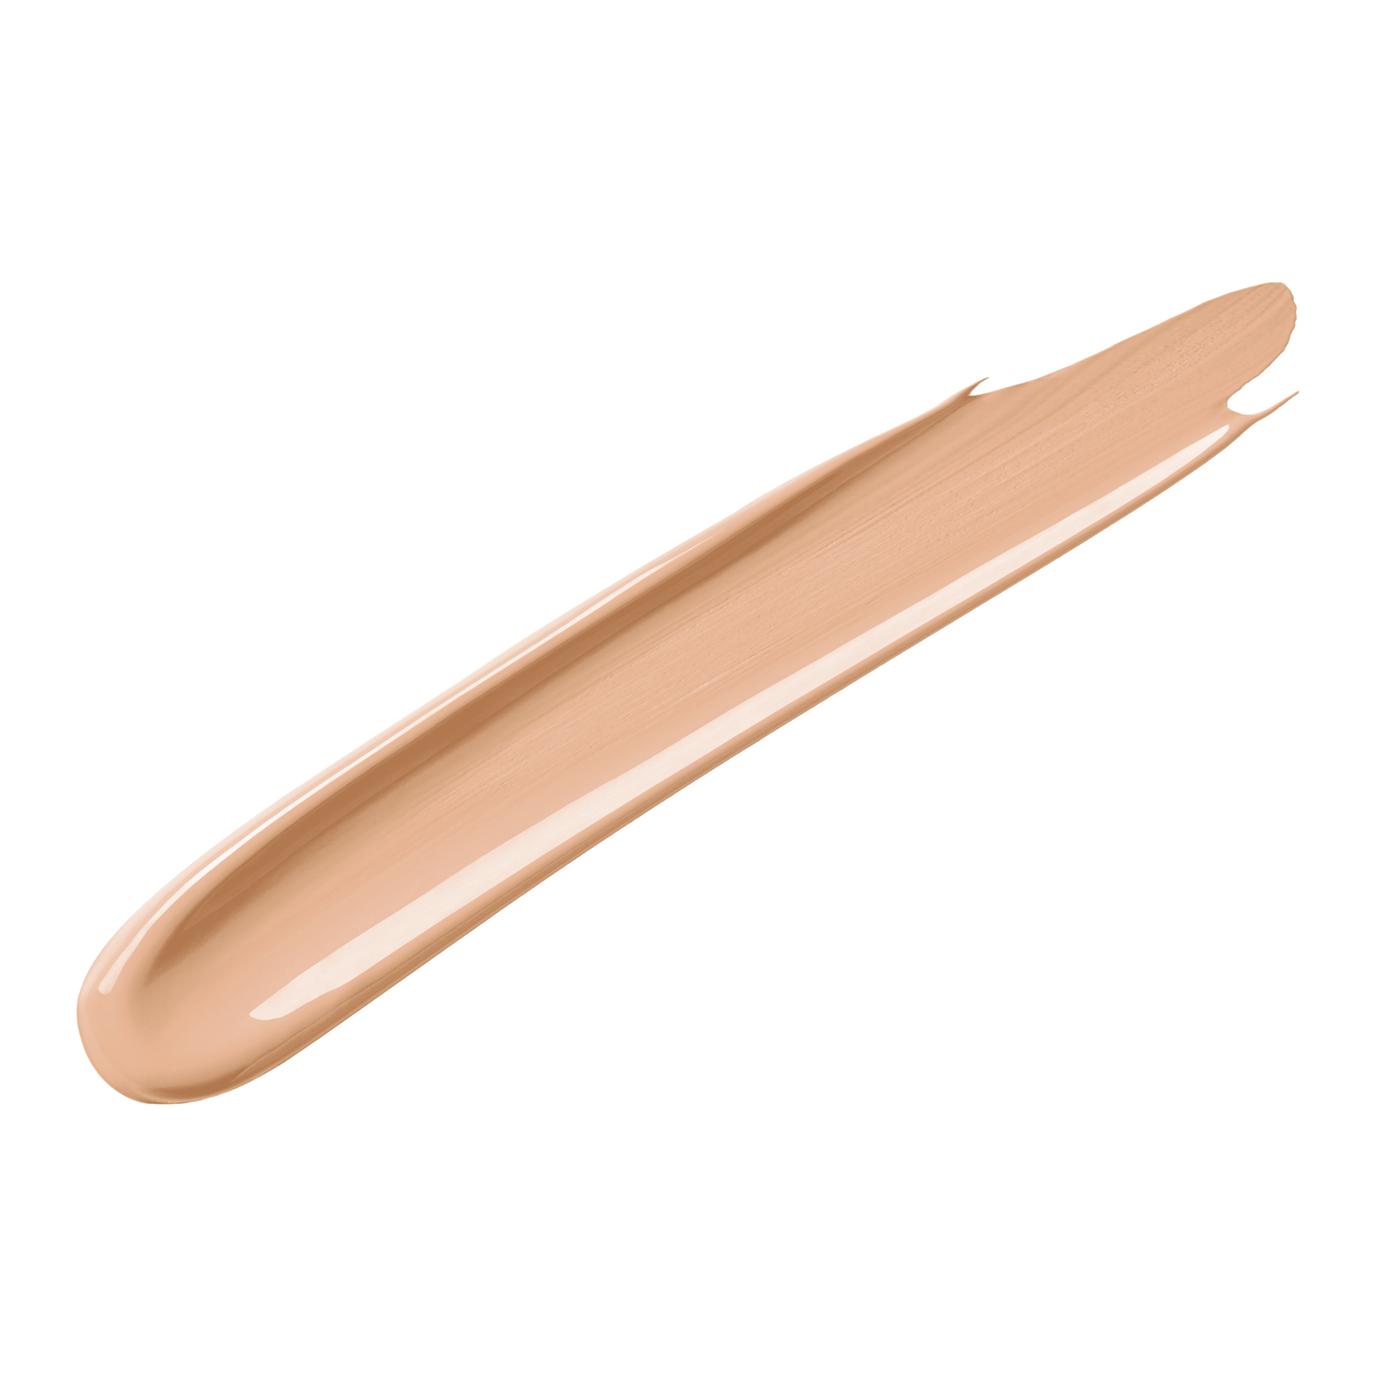 Covergirl Clean Invisible Concealer - Golden Ivory; image 7 of 14